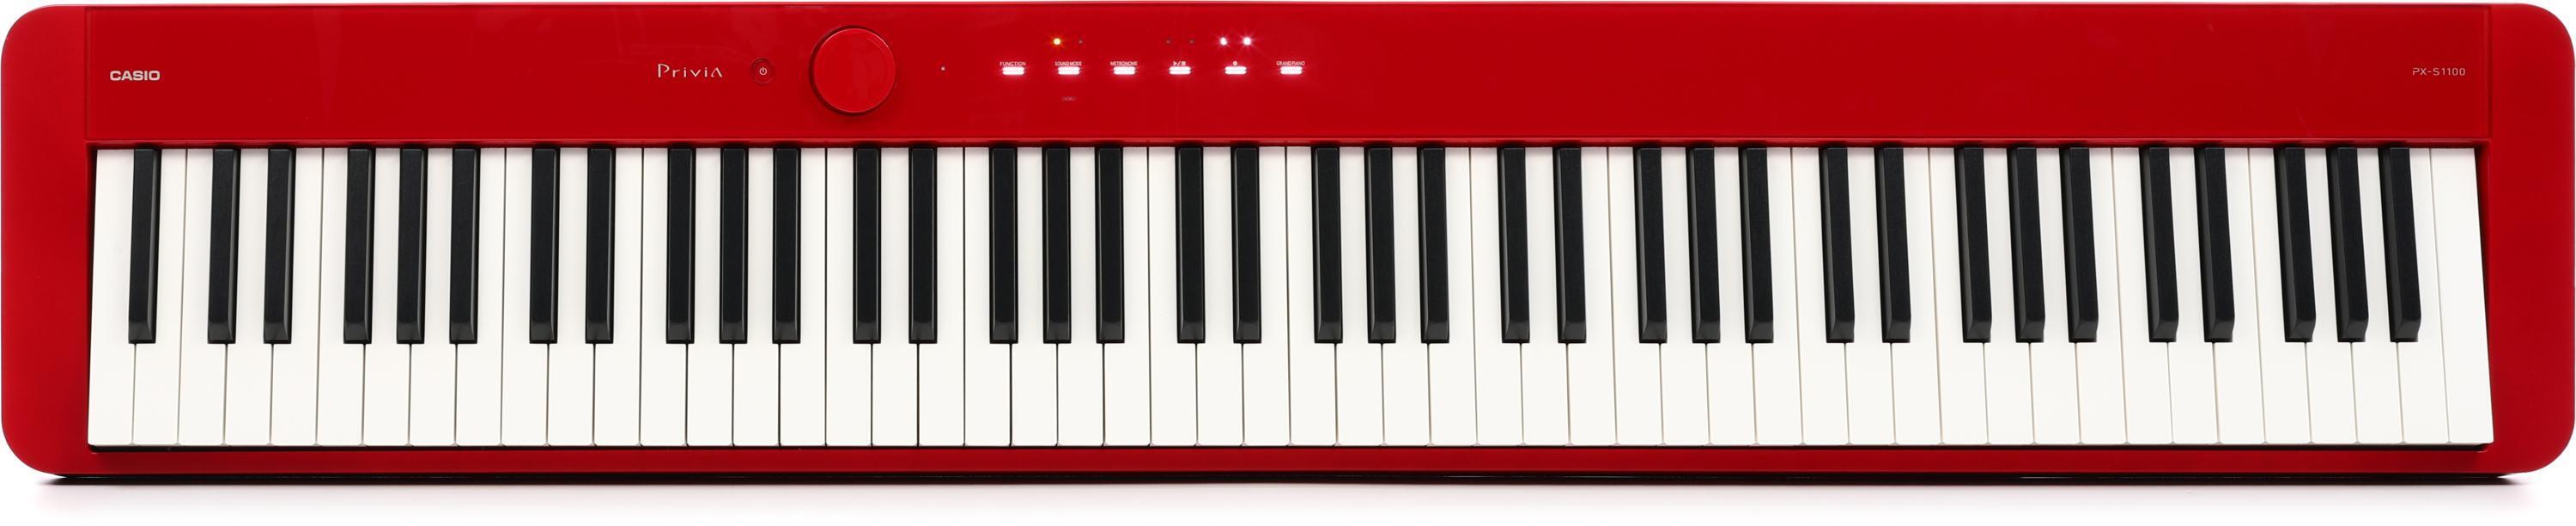 Casio Privia PX-S1100 Digital Piano - Red | Sweetwater